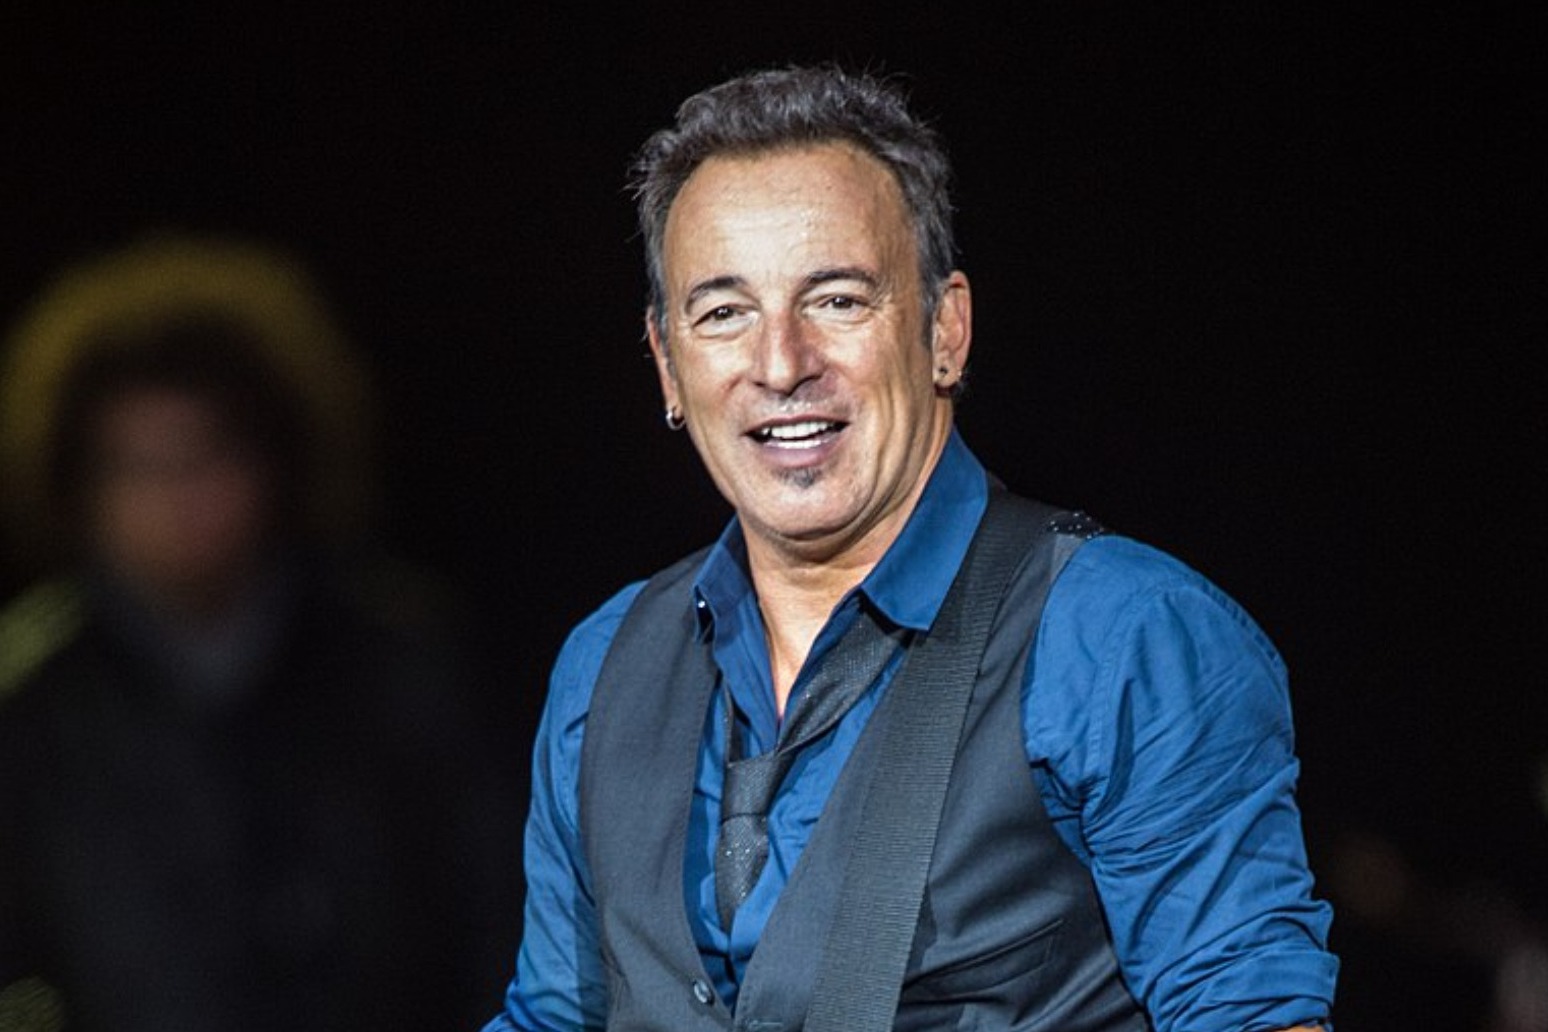 Drink-driving charge against Bruce Springsteen dropped 